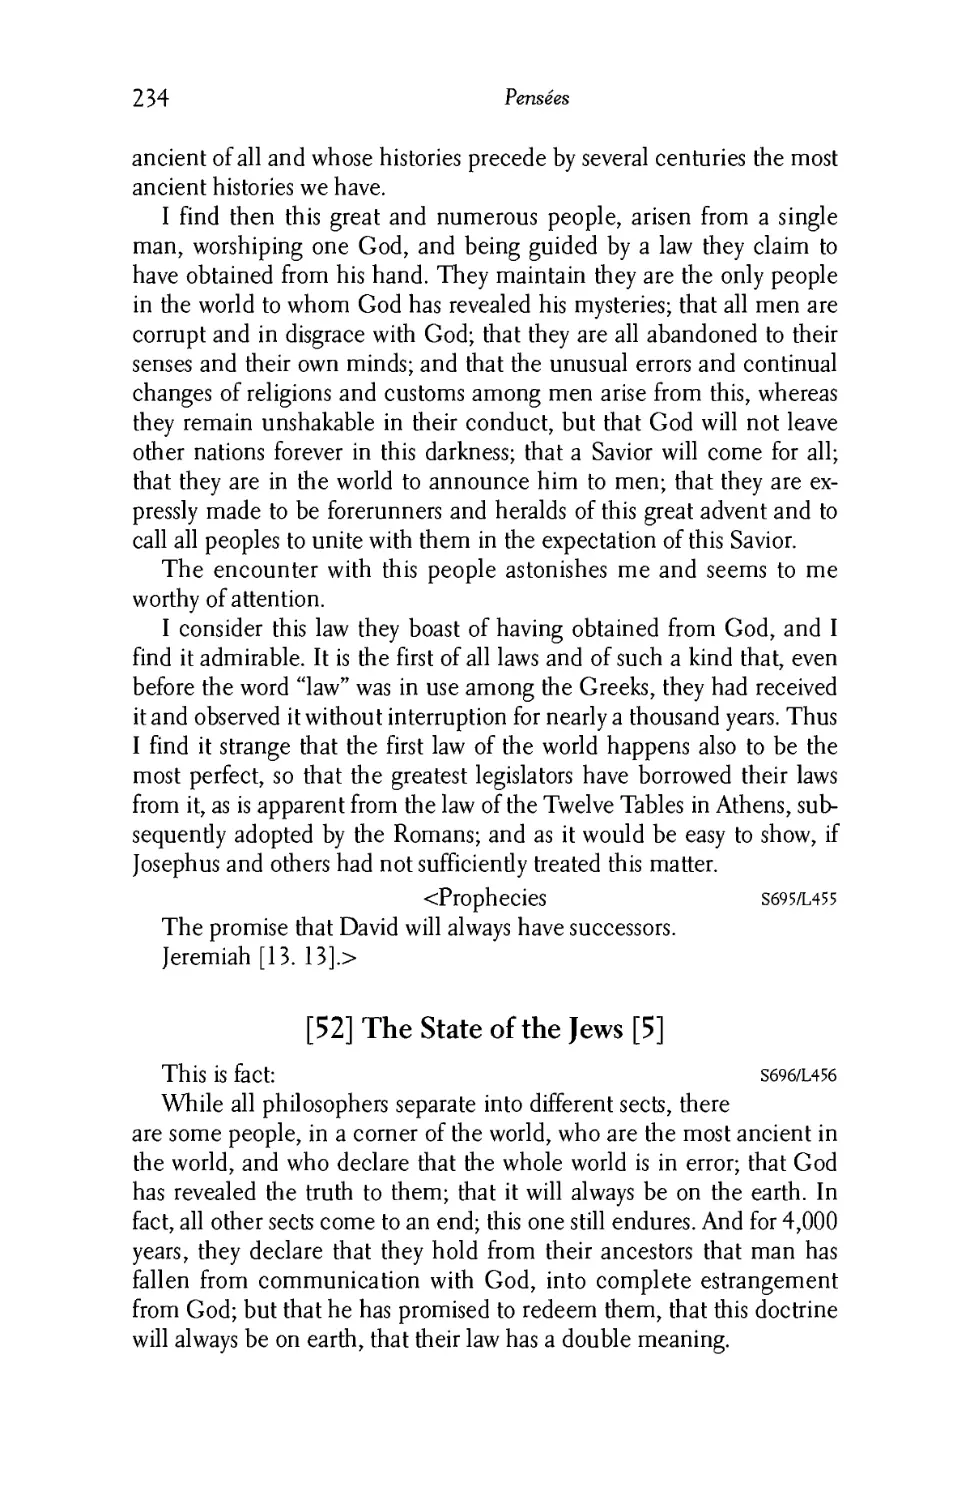 52. The State of the Jews 5